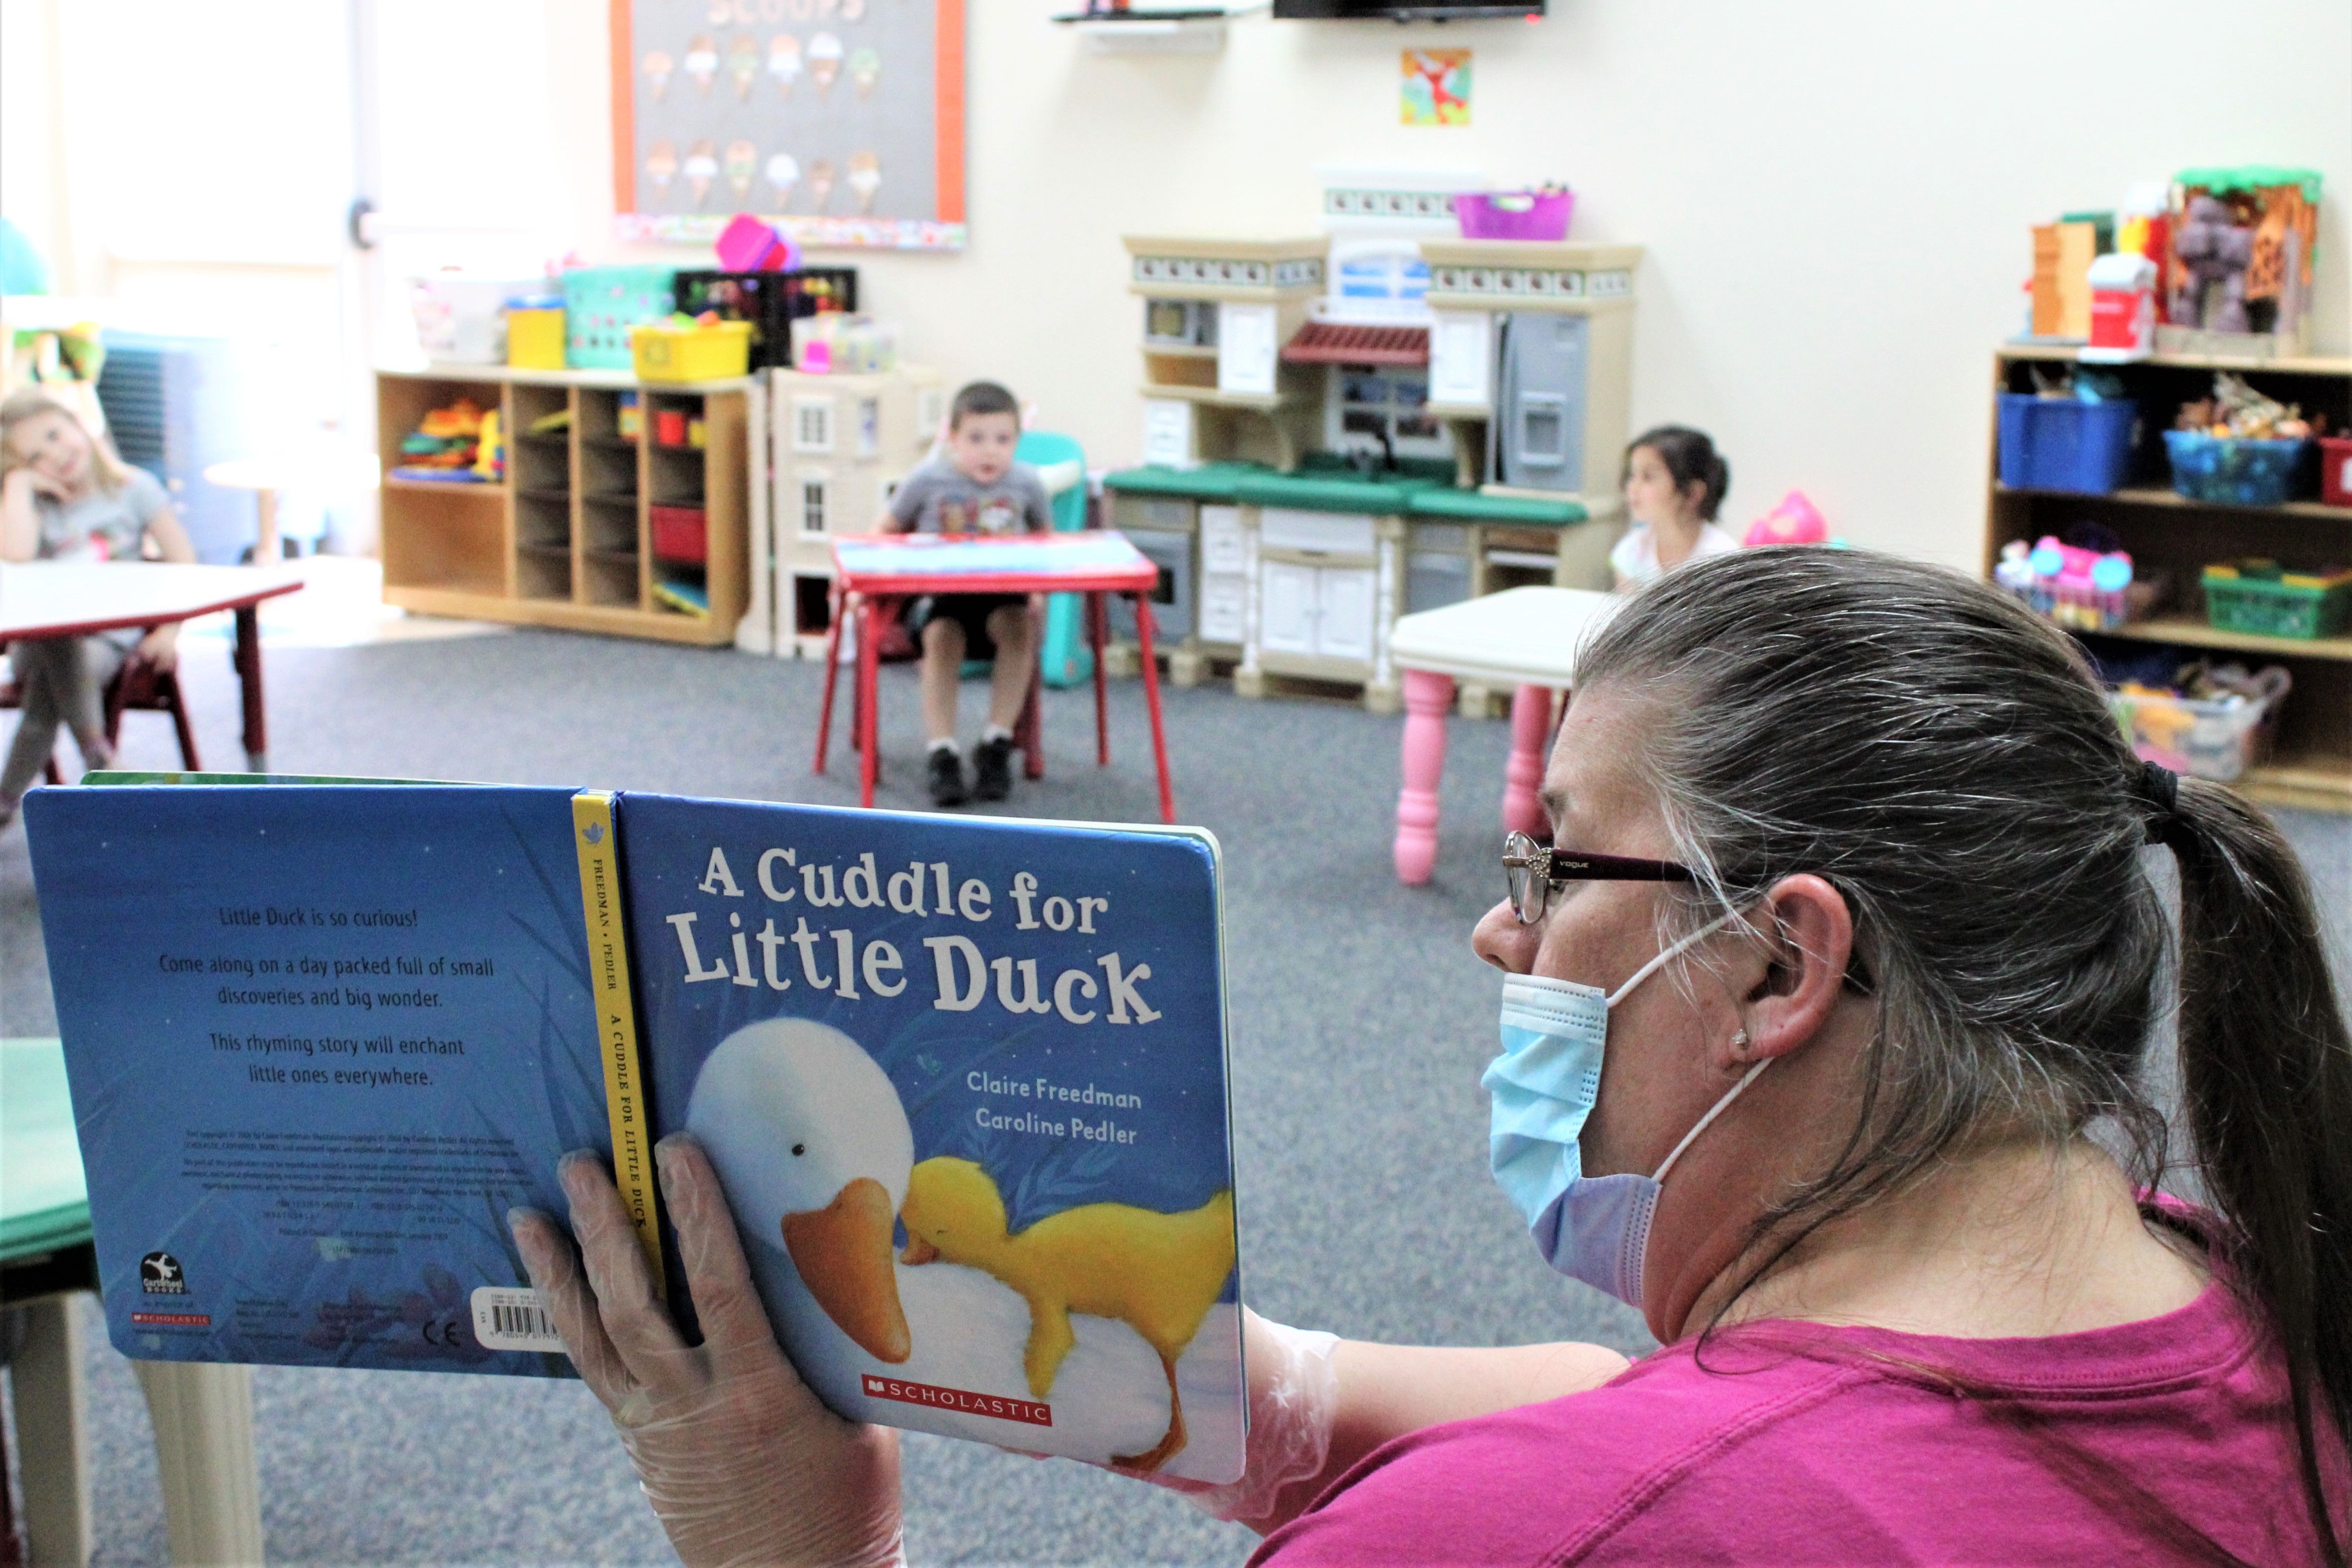 Daycare provider Darlene Mount reads a book to children at a New Jersey YMCA during the ongoing COVID-19 pandemic. The children are in a modified circle that allows for proper social distancing. (Courtesy of Andrea Plaza)